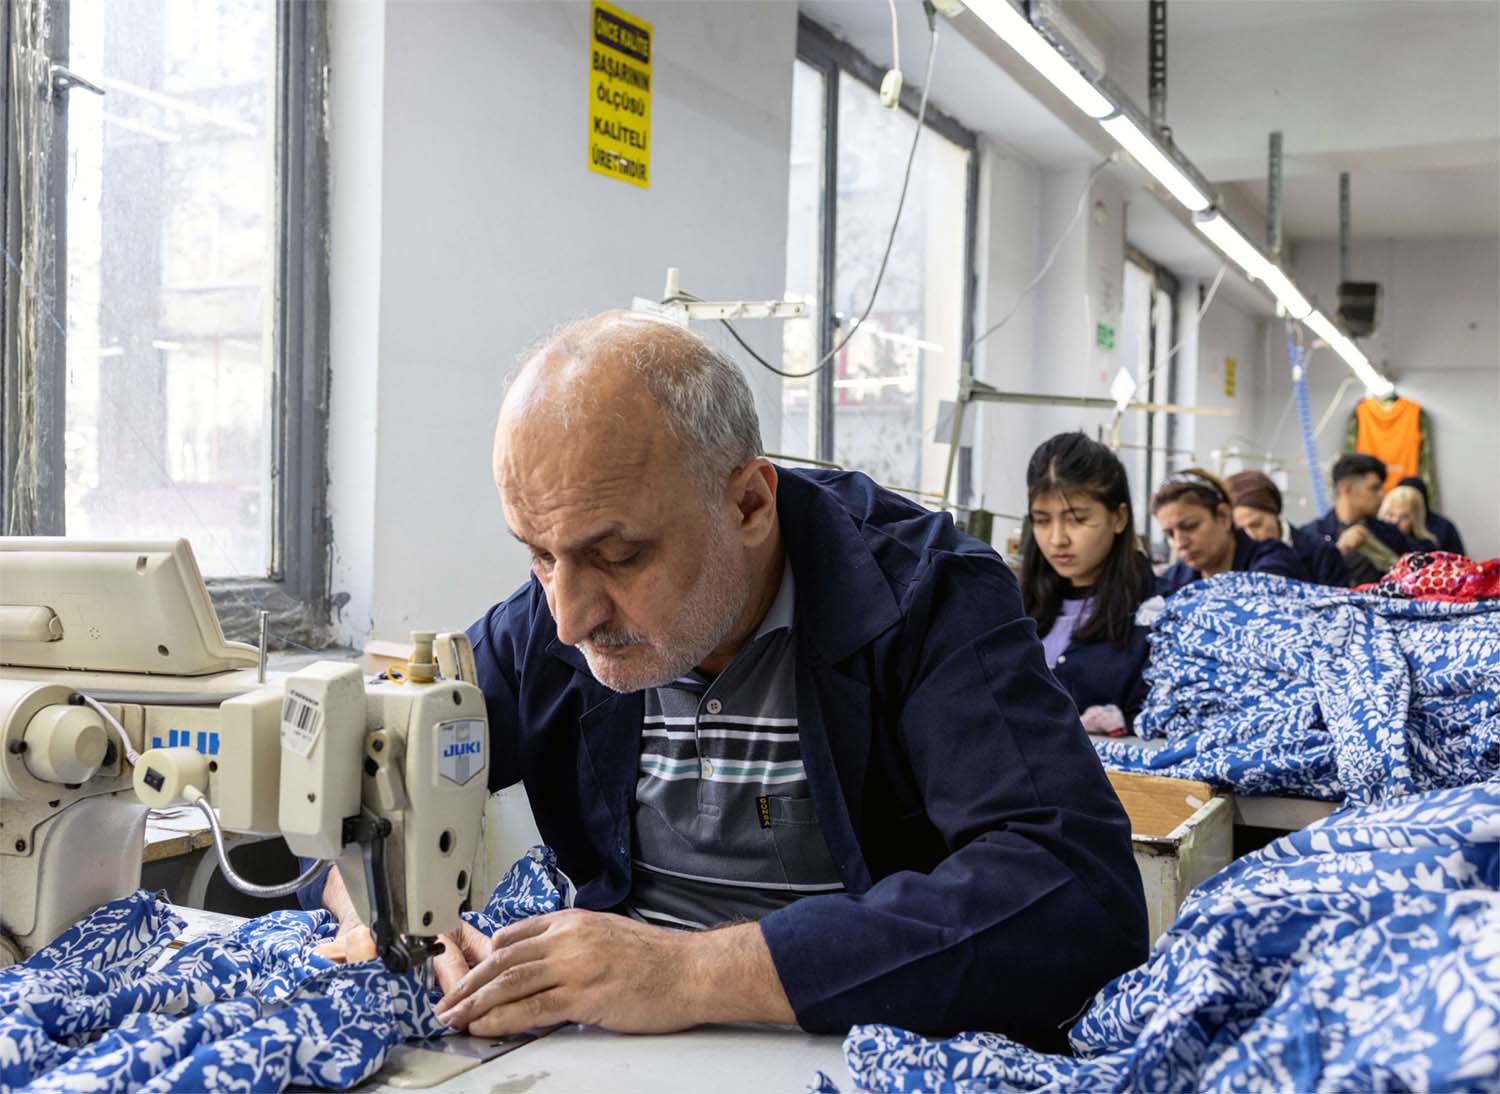 Apparel officials say the new taxes are squeezing the industry, which is among Turkey's biggest employers